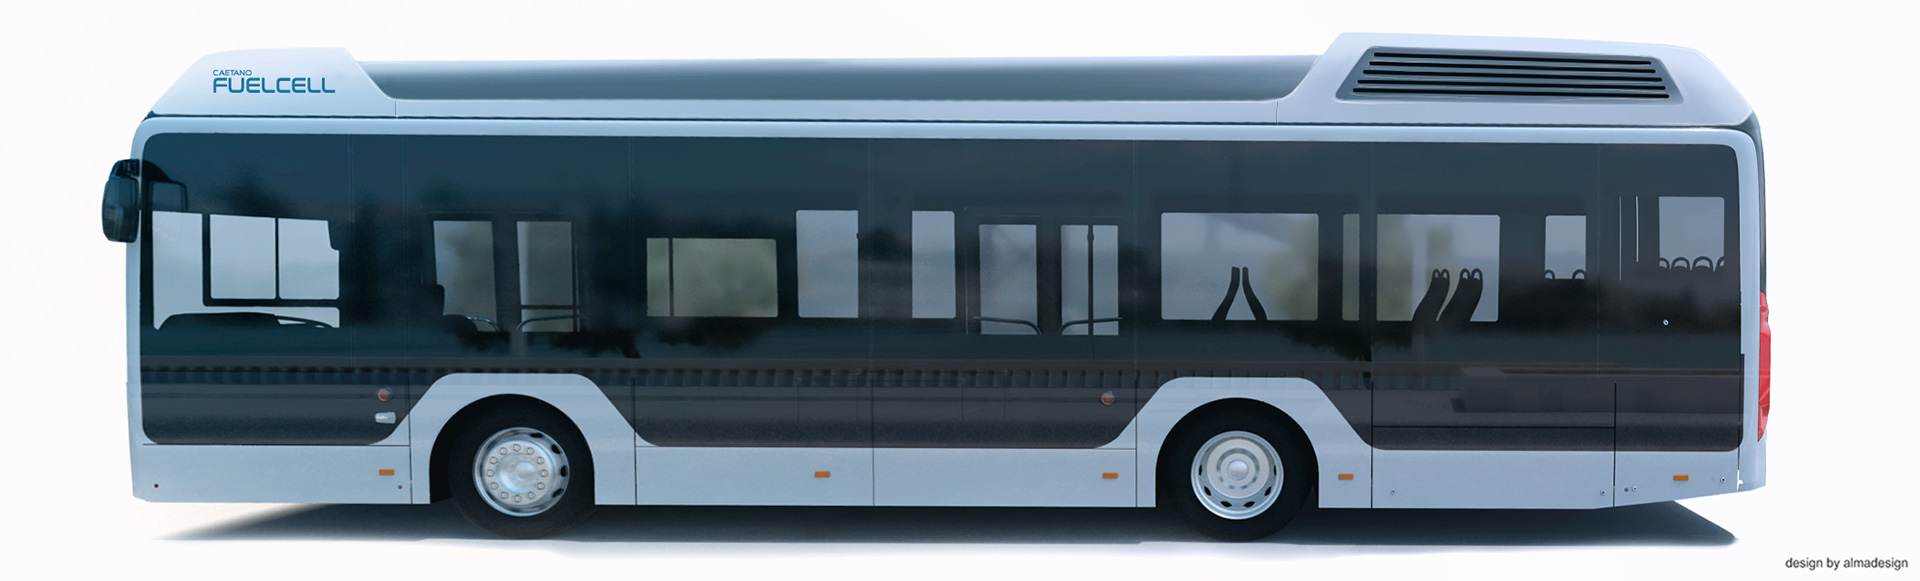 toyota fuel cell bus